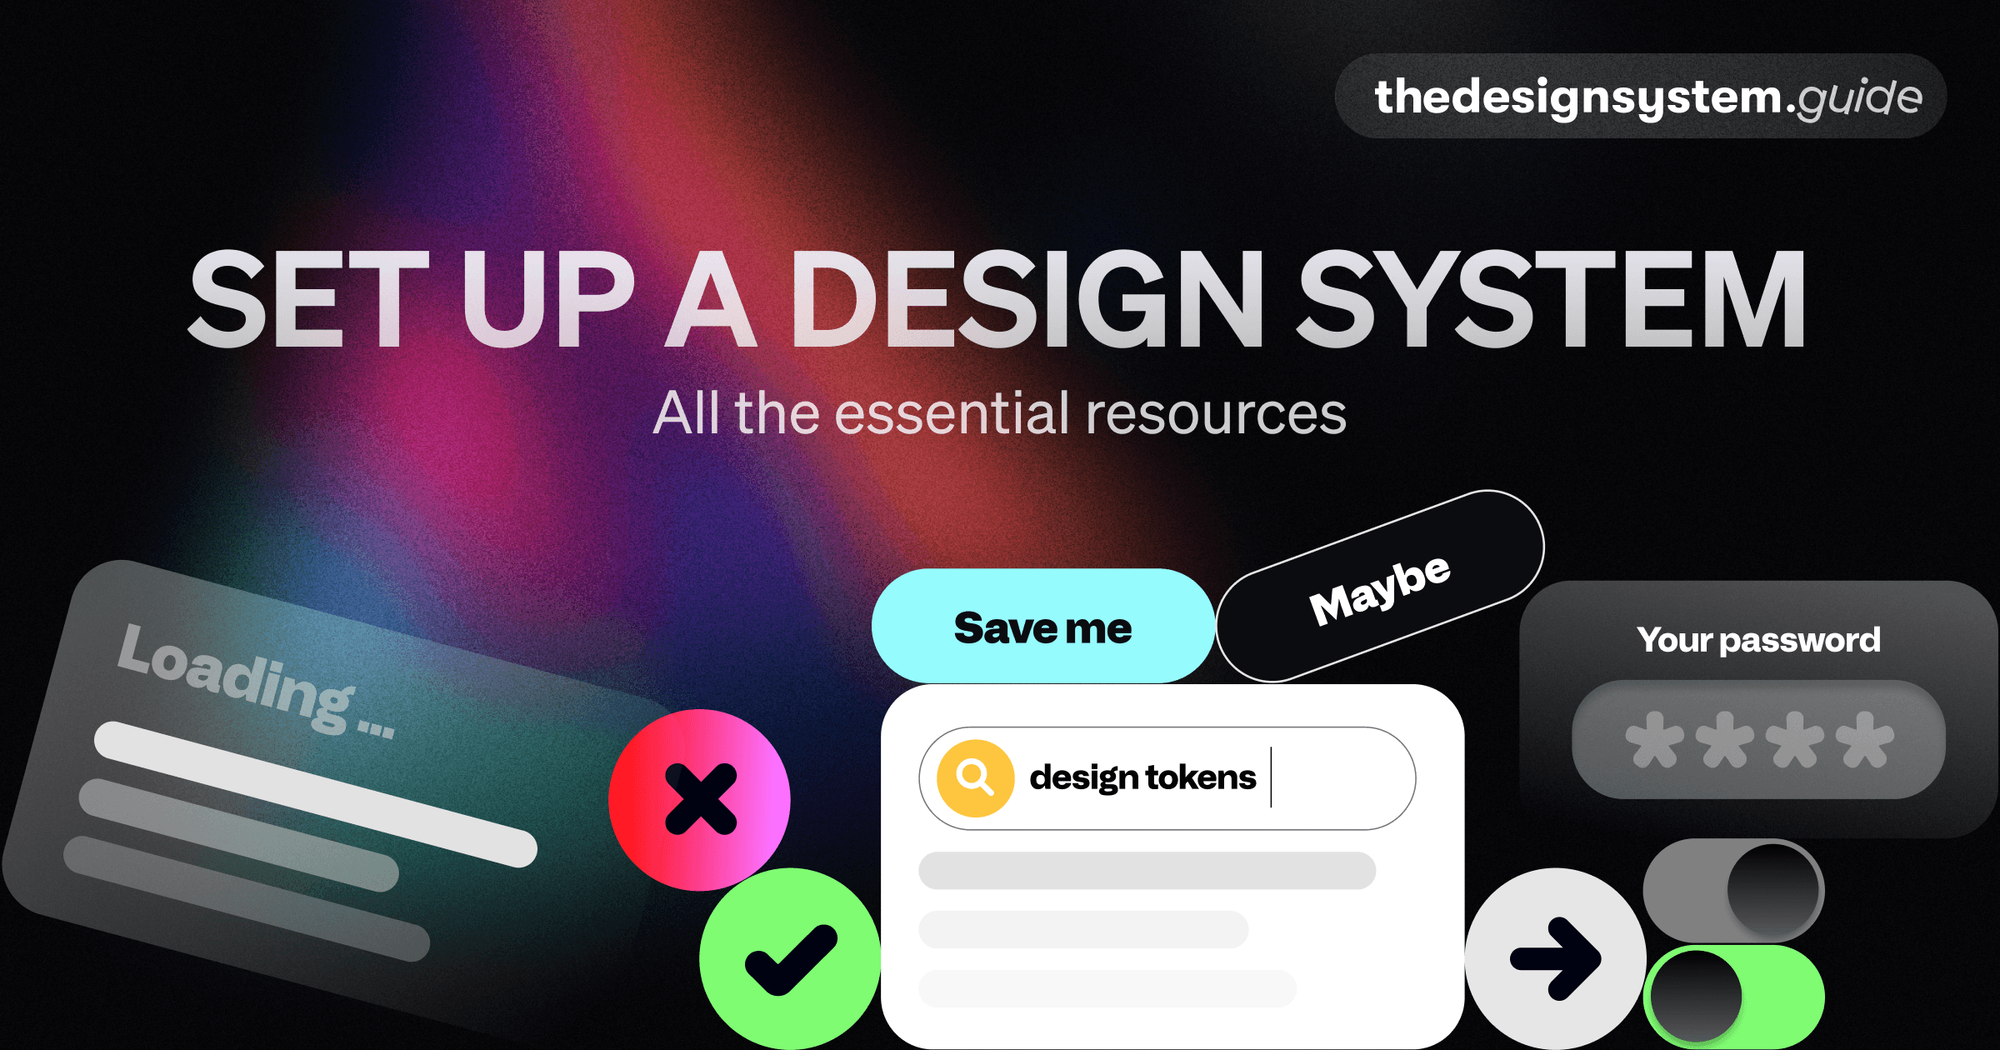 The Design System Guide